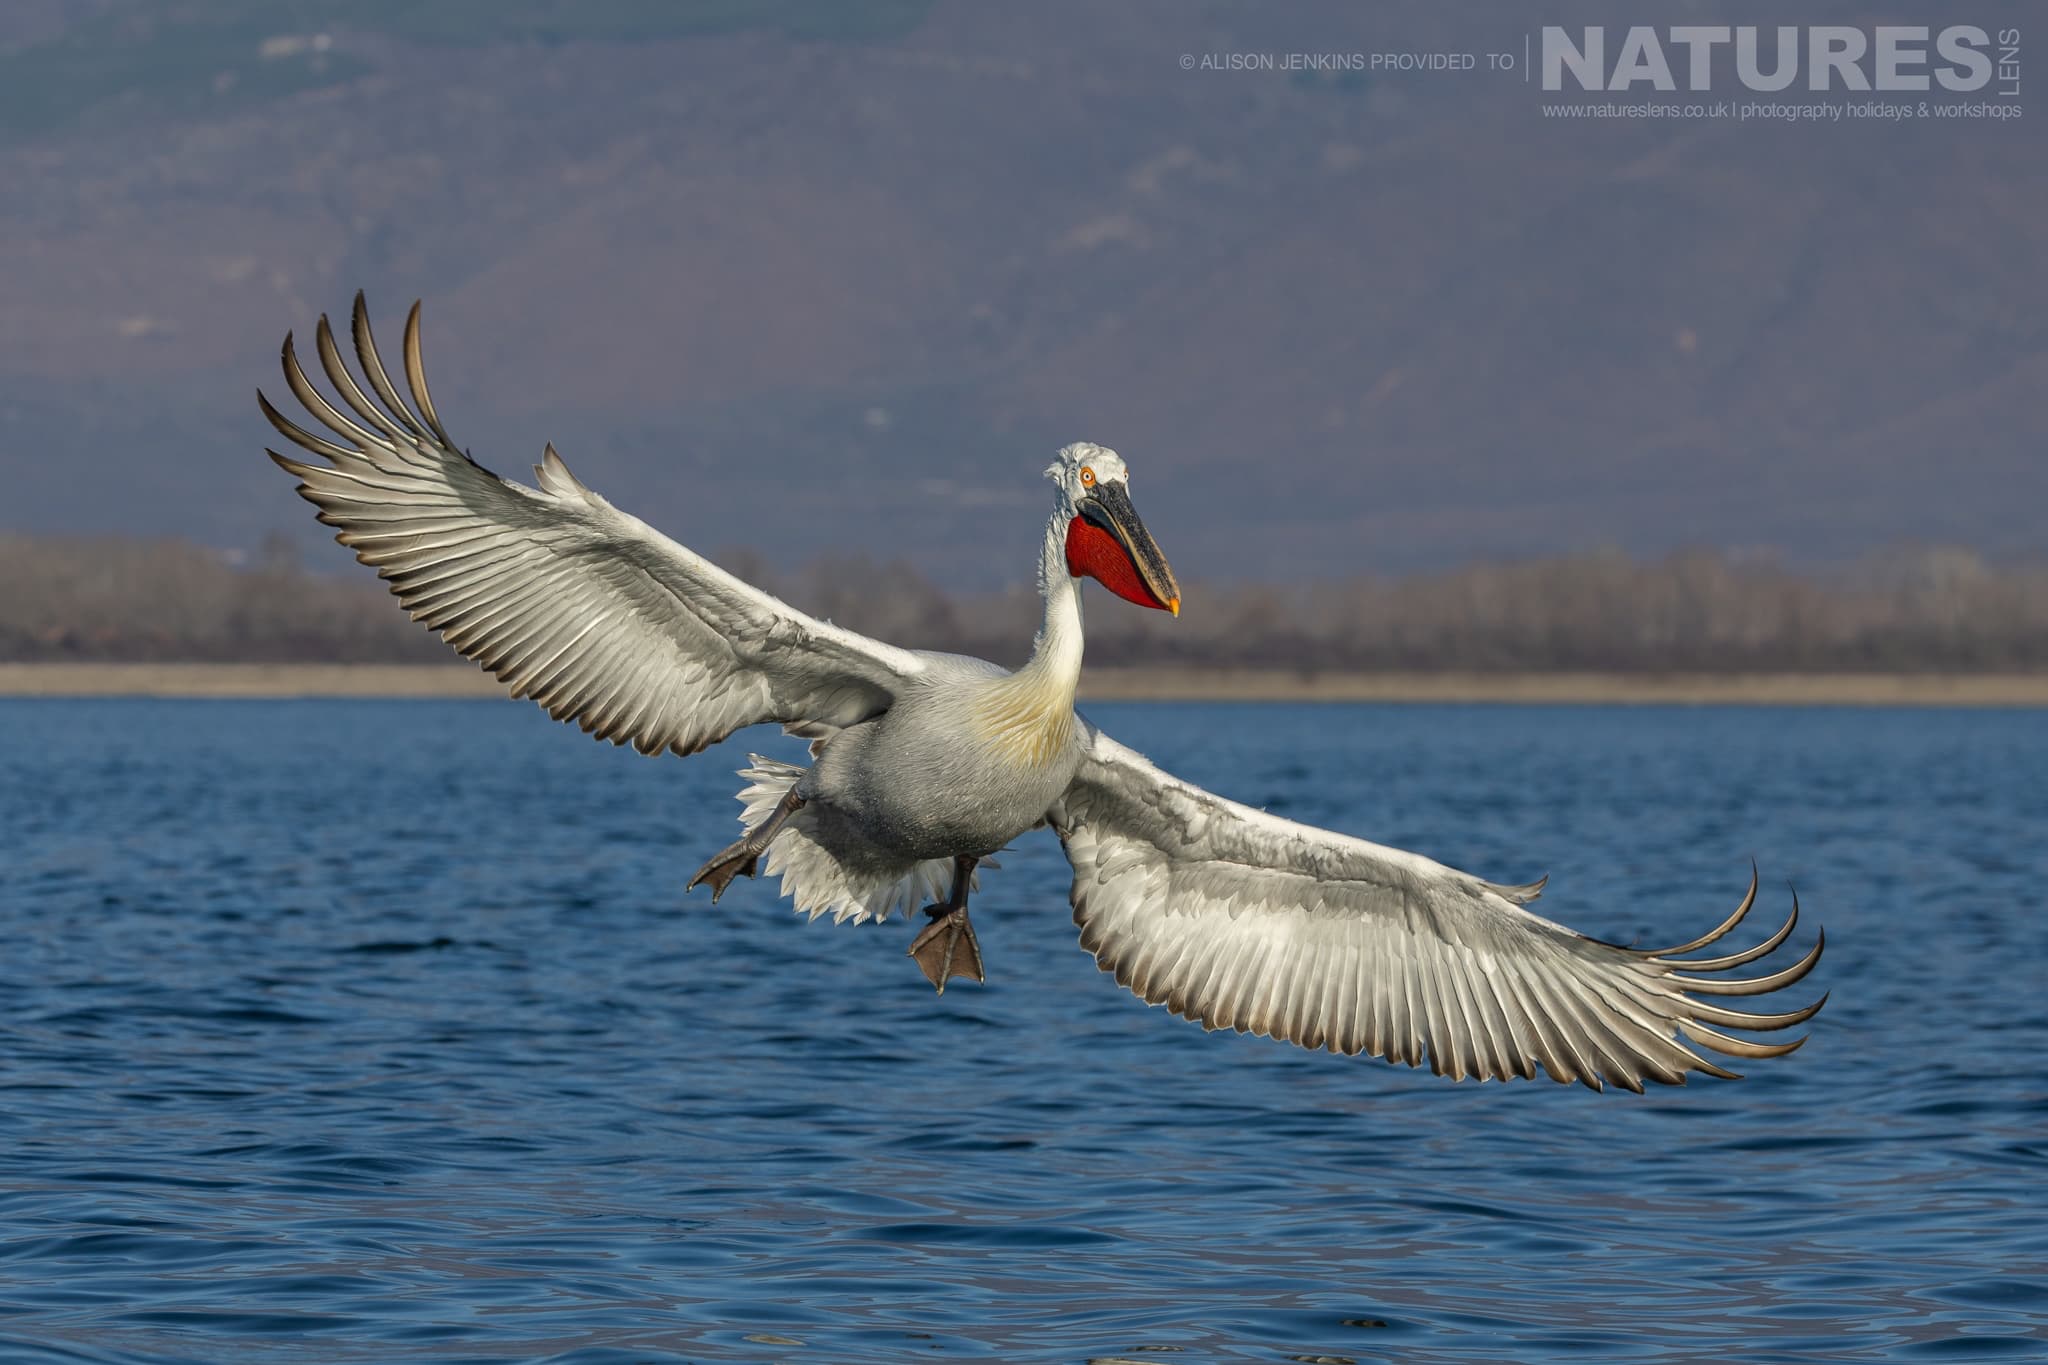 One Of The Pelicans Of Lake Kerkini Showing It's Massive Wingspan Photographed During A Natureslens Wildlife Photography Holiday